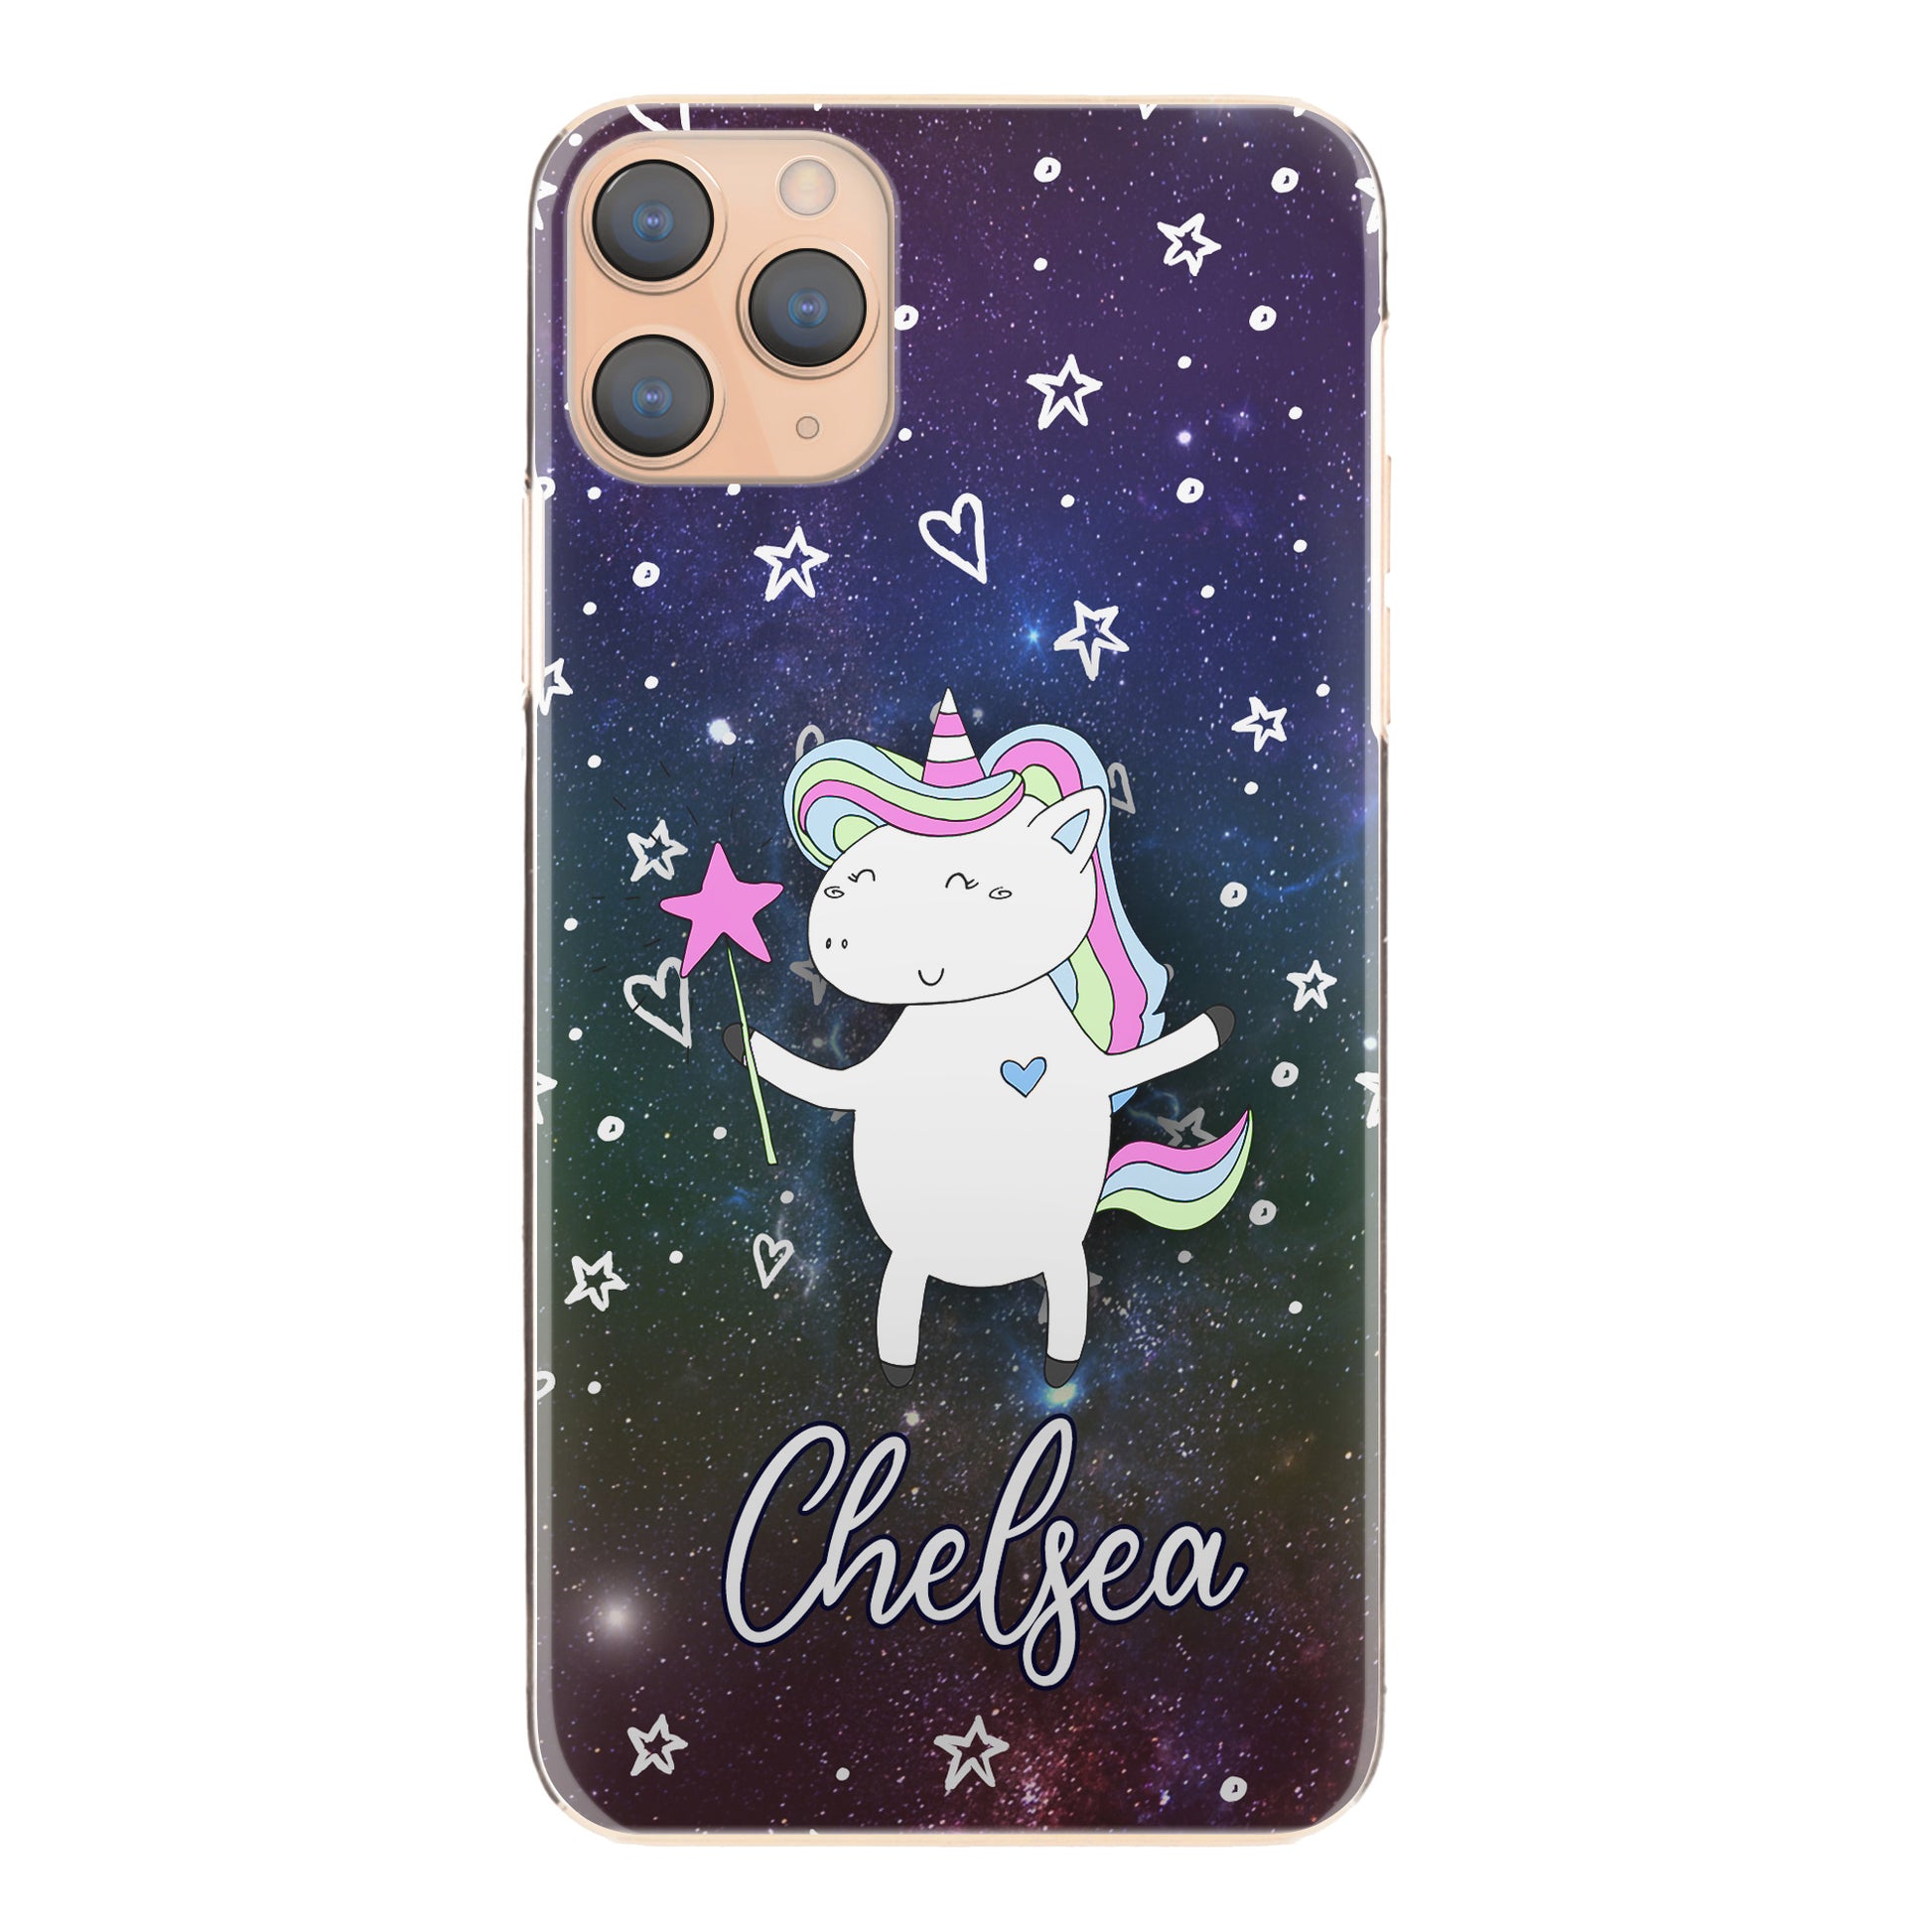 Personalised Huawei Phone Hard Case with Magic Unicorn and Name on Stars and Hearts Galaxy